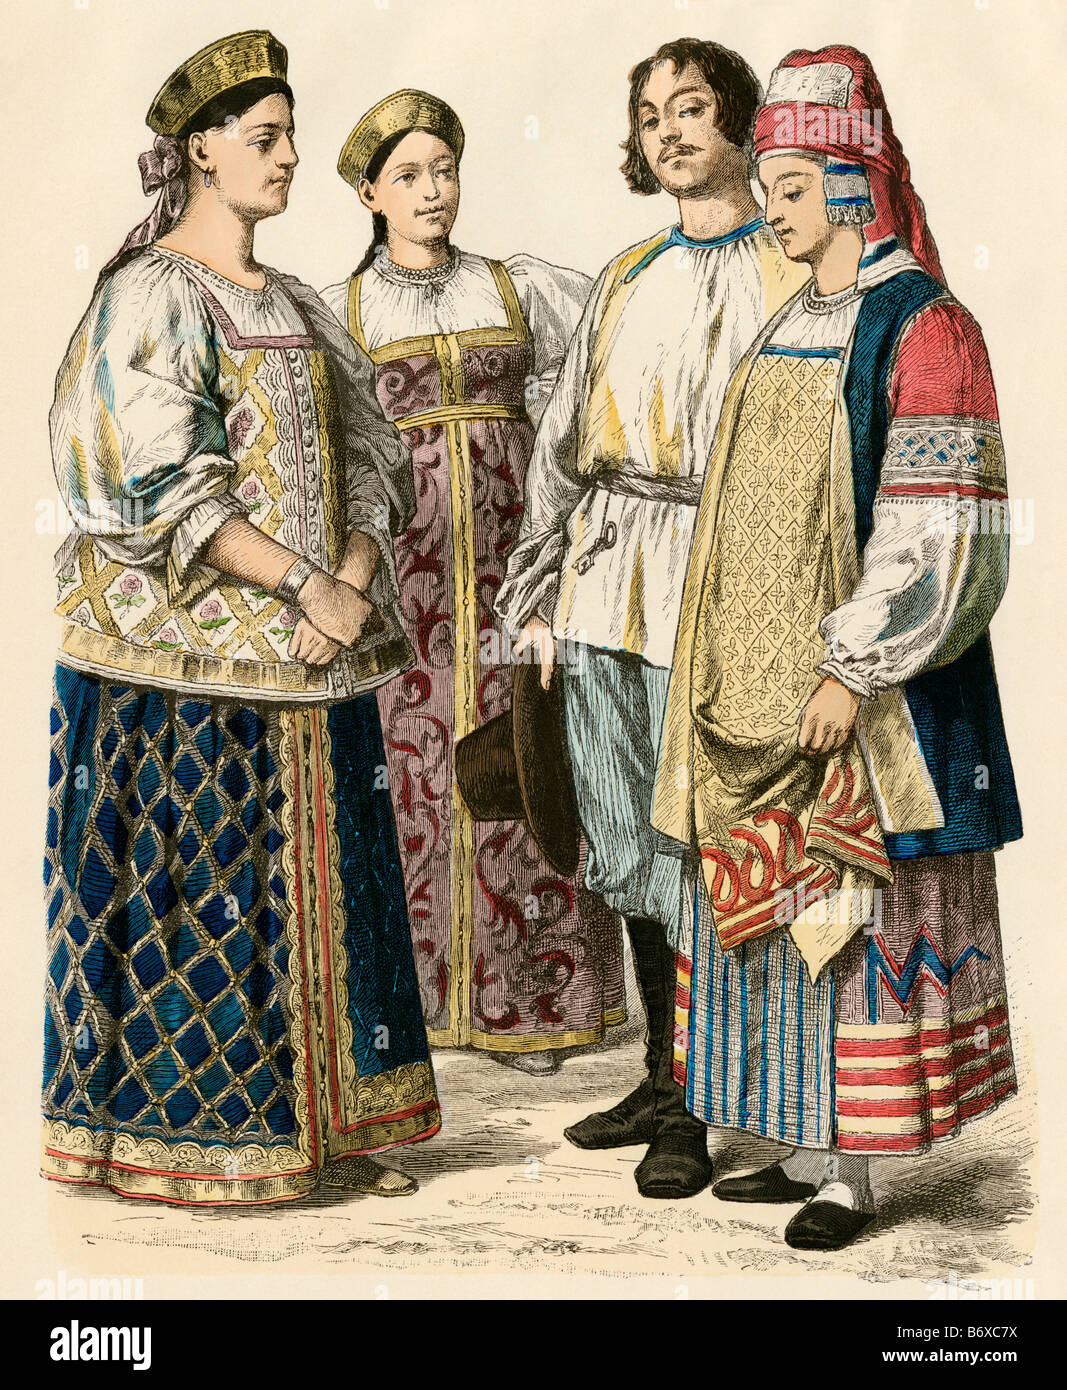 Woman from Jaroslaw Poland, woman from Tvier, and a couple from Kaluga in Russia. Hand-colored print Stock Photo